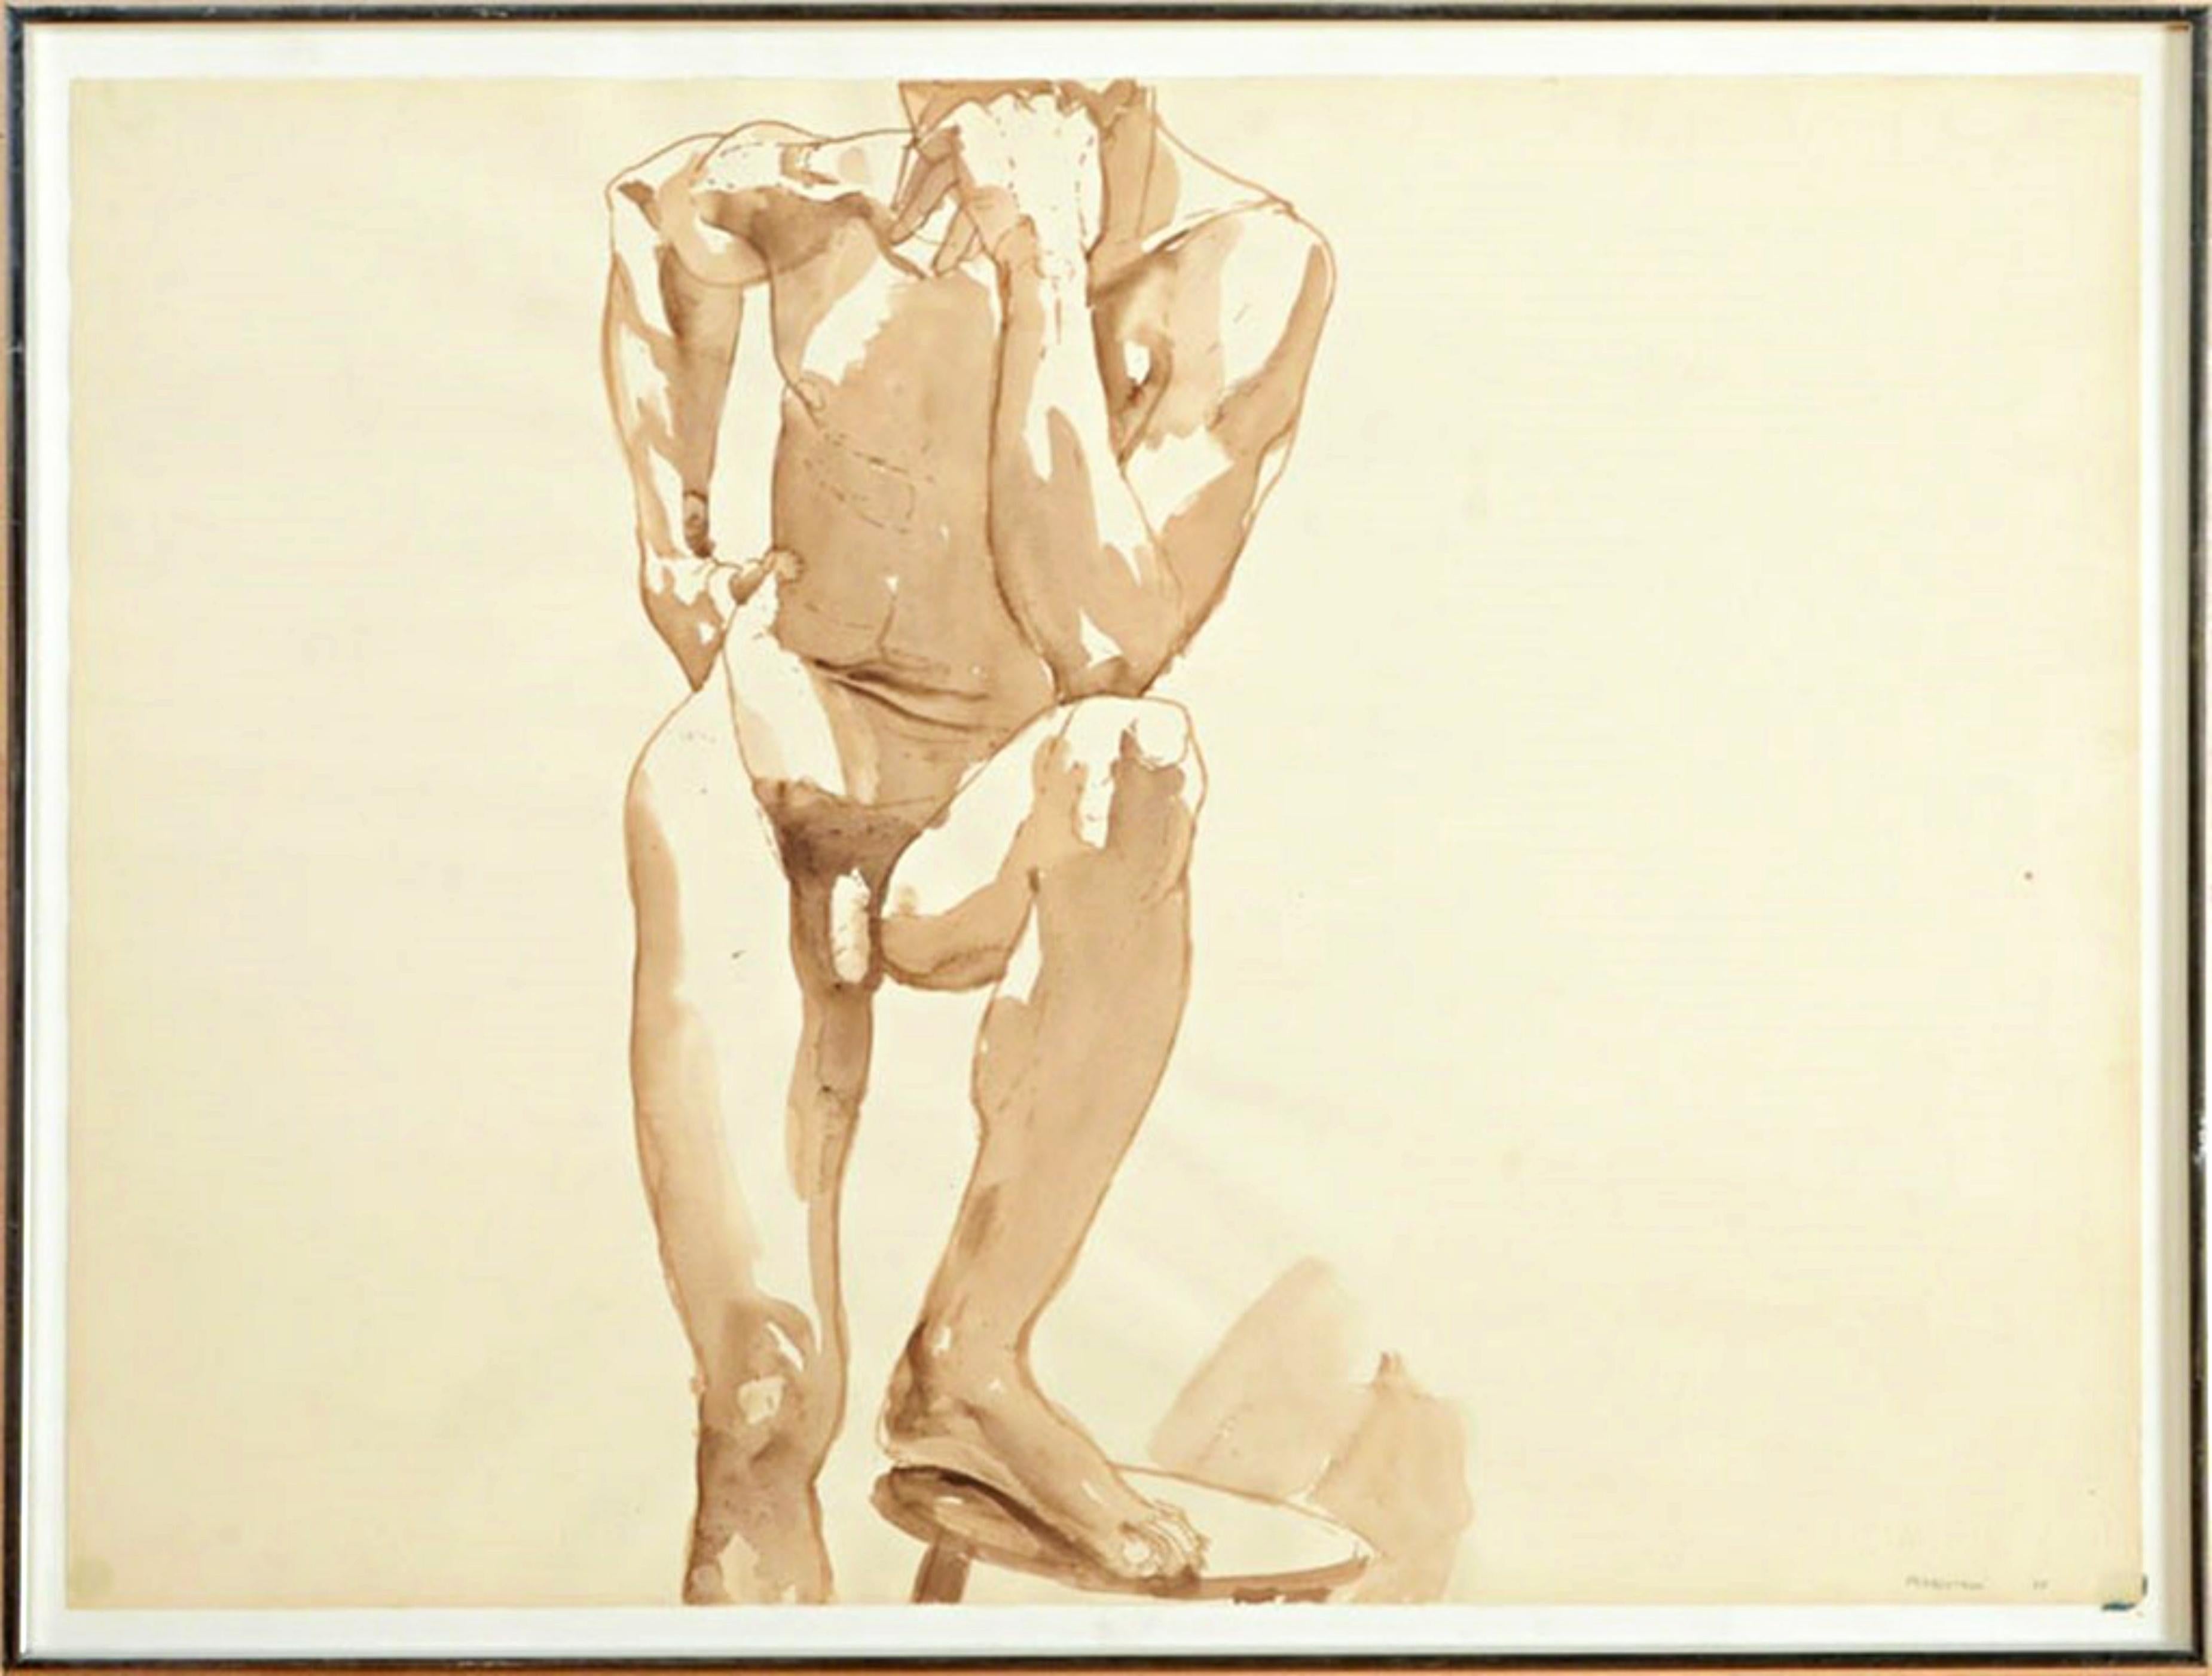 1960s Nude Drawings and Watercolors